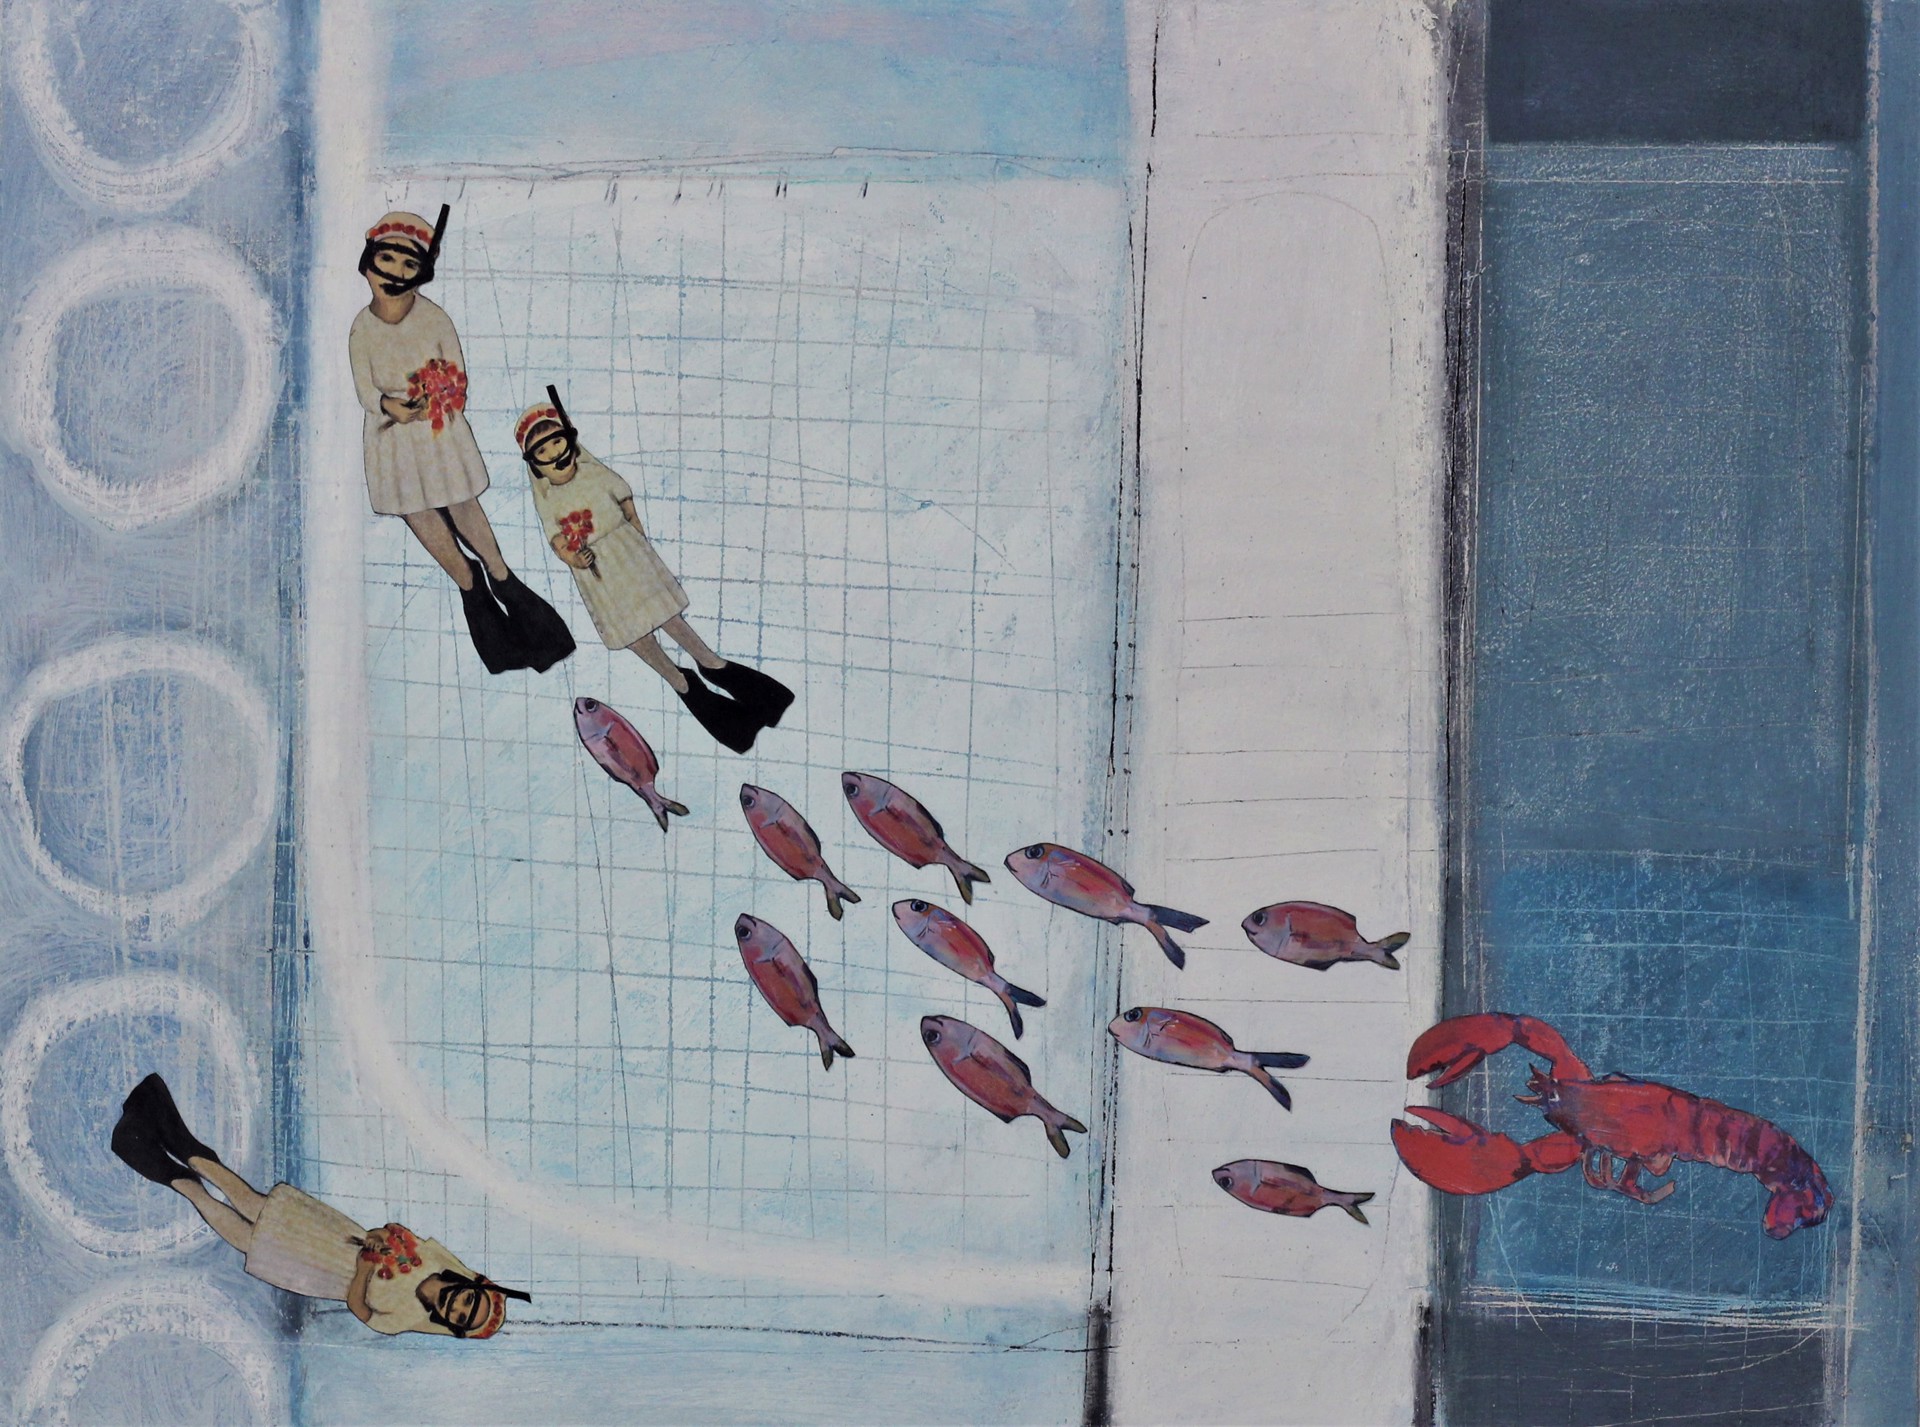 SWIMMING WITH MY SISTERS by CHRISTINA THWAITES (Figures)